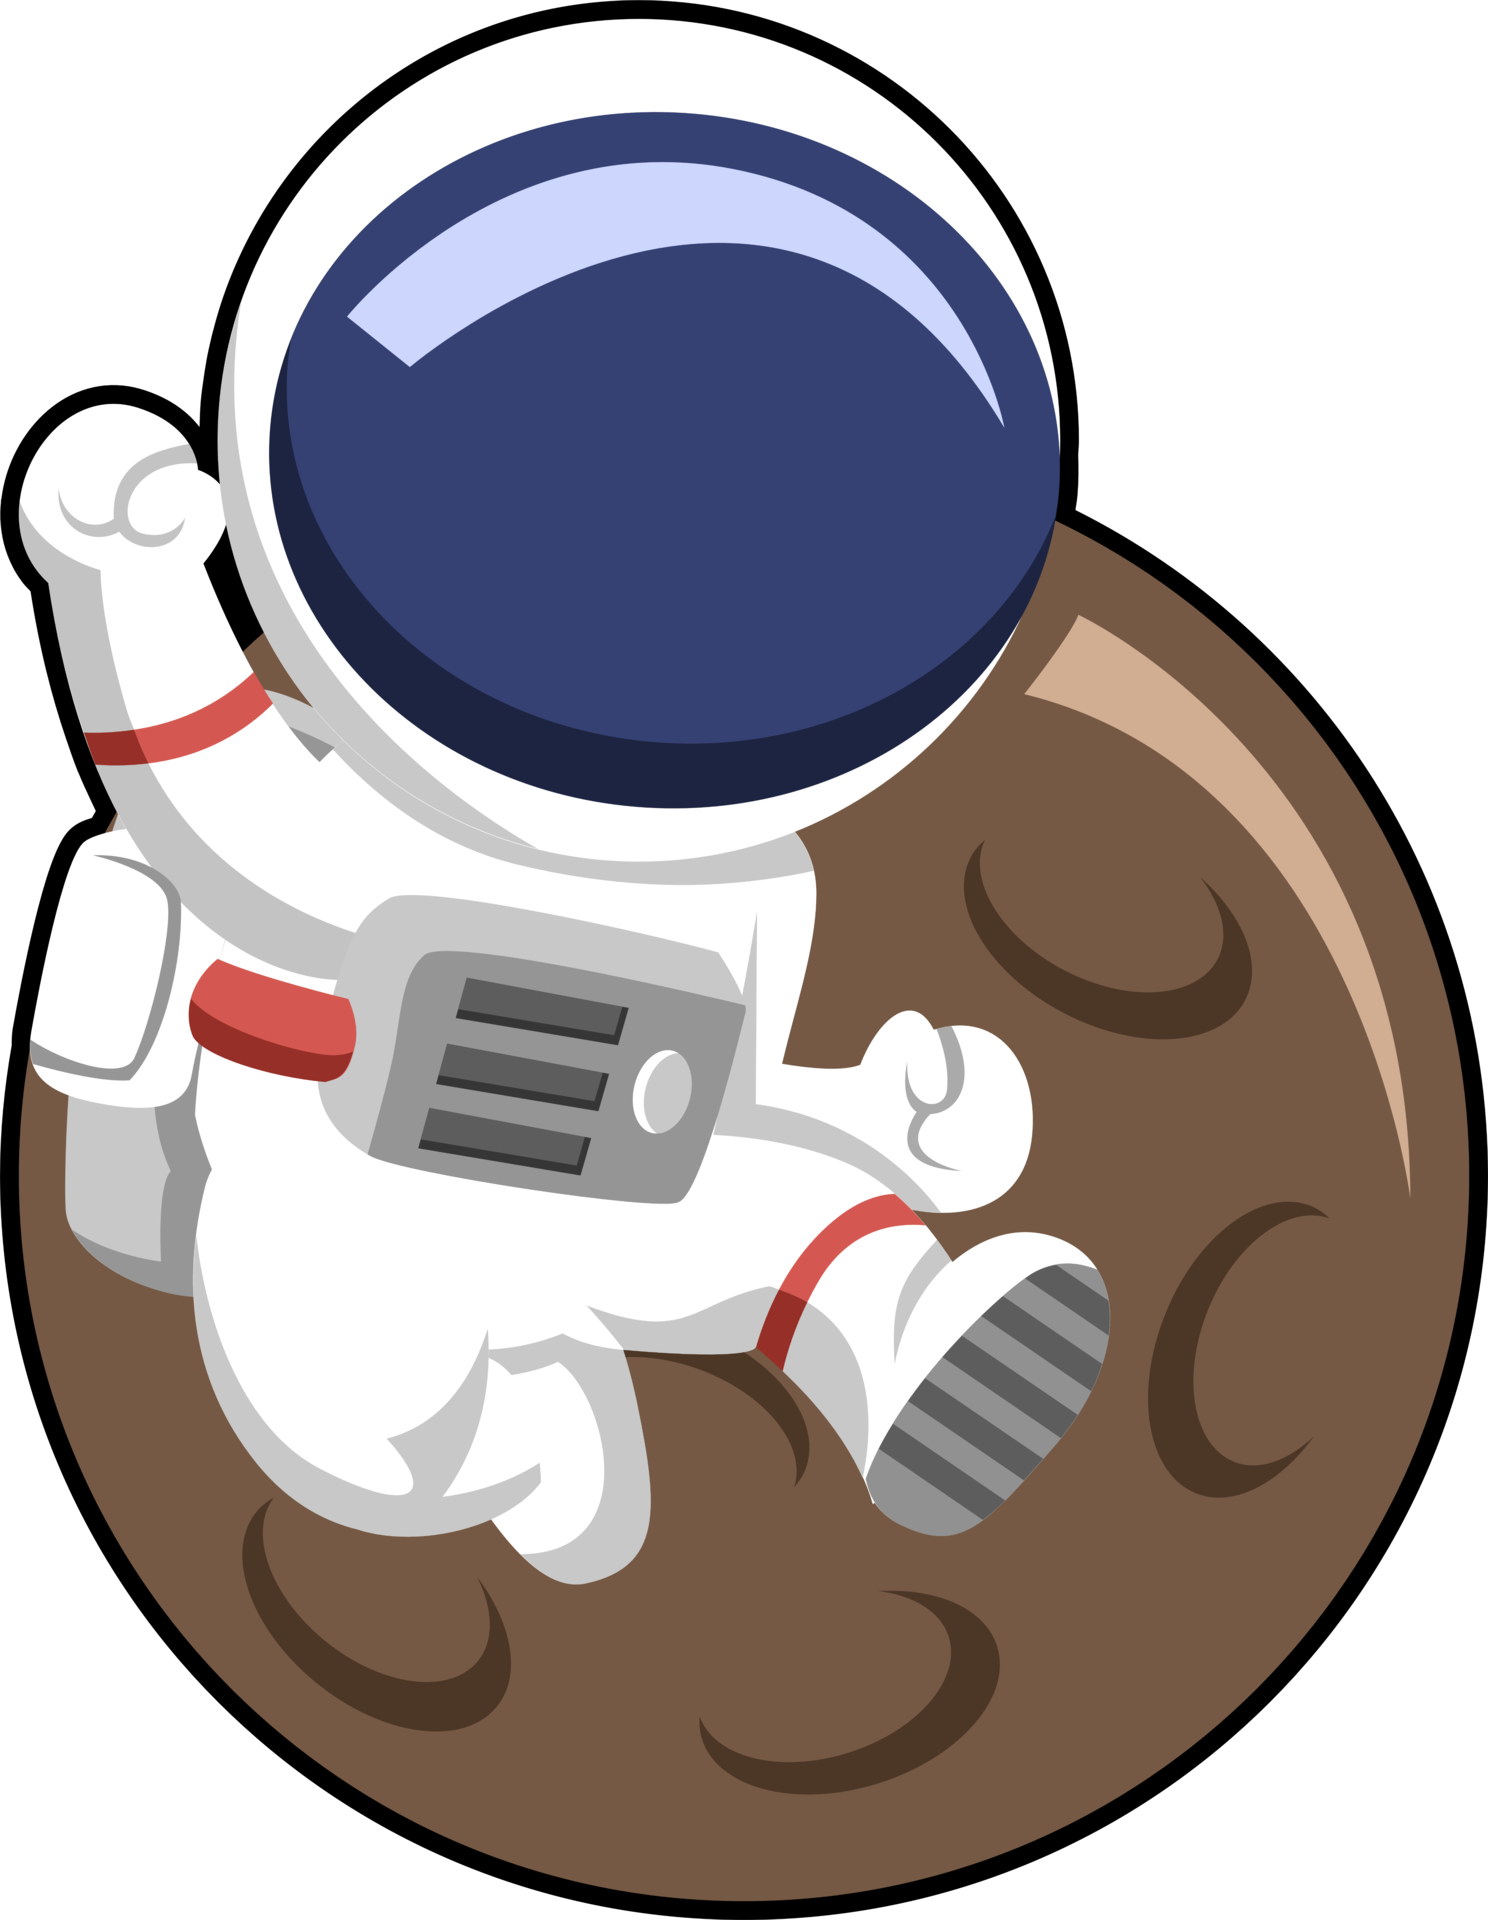 Astronaut Png Graphic Clipart Design 20003904 Png